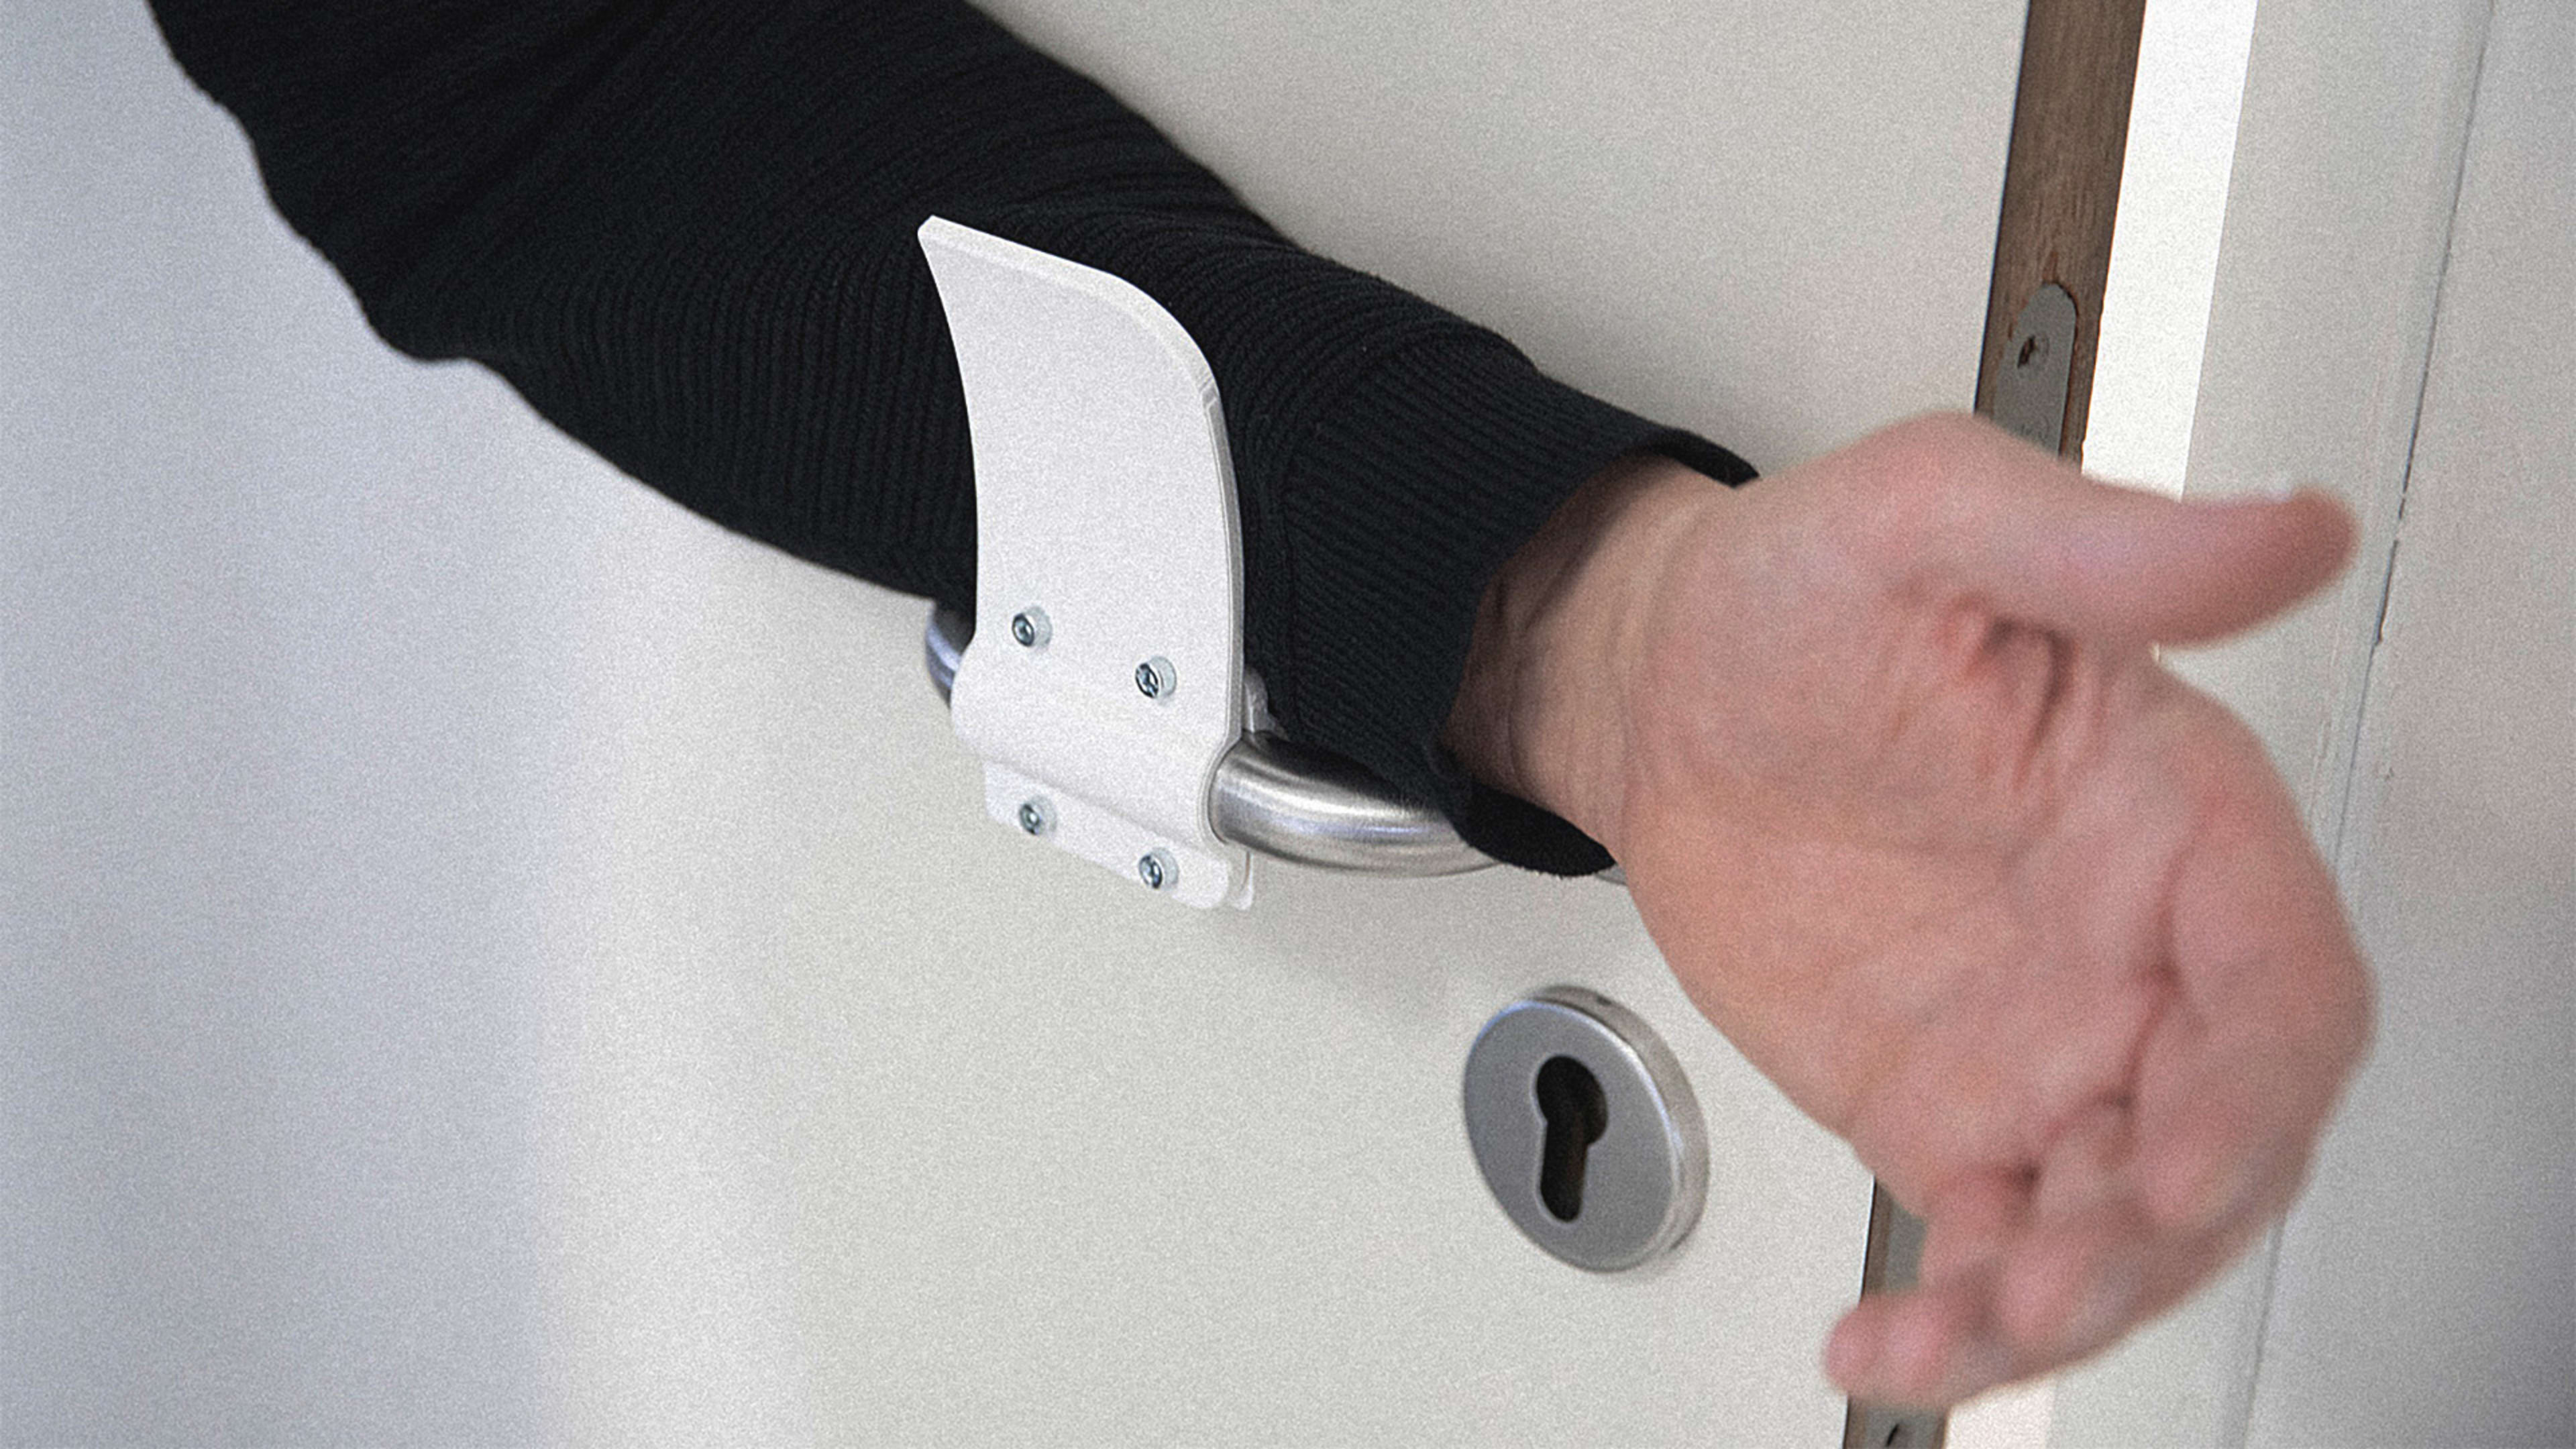 This simple 3D-printable attachment lets you open doors hands-free